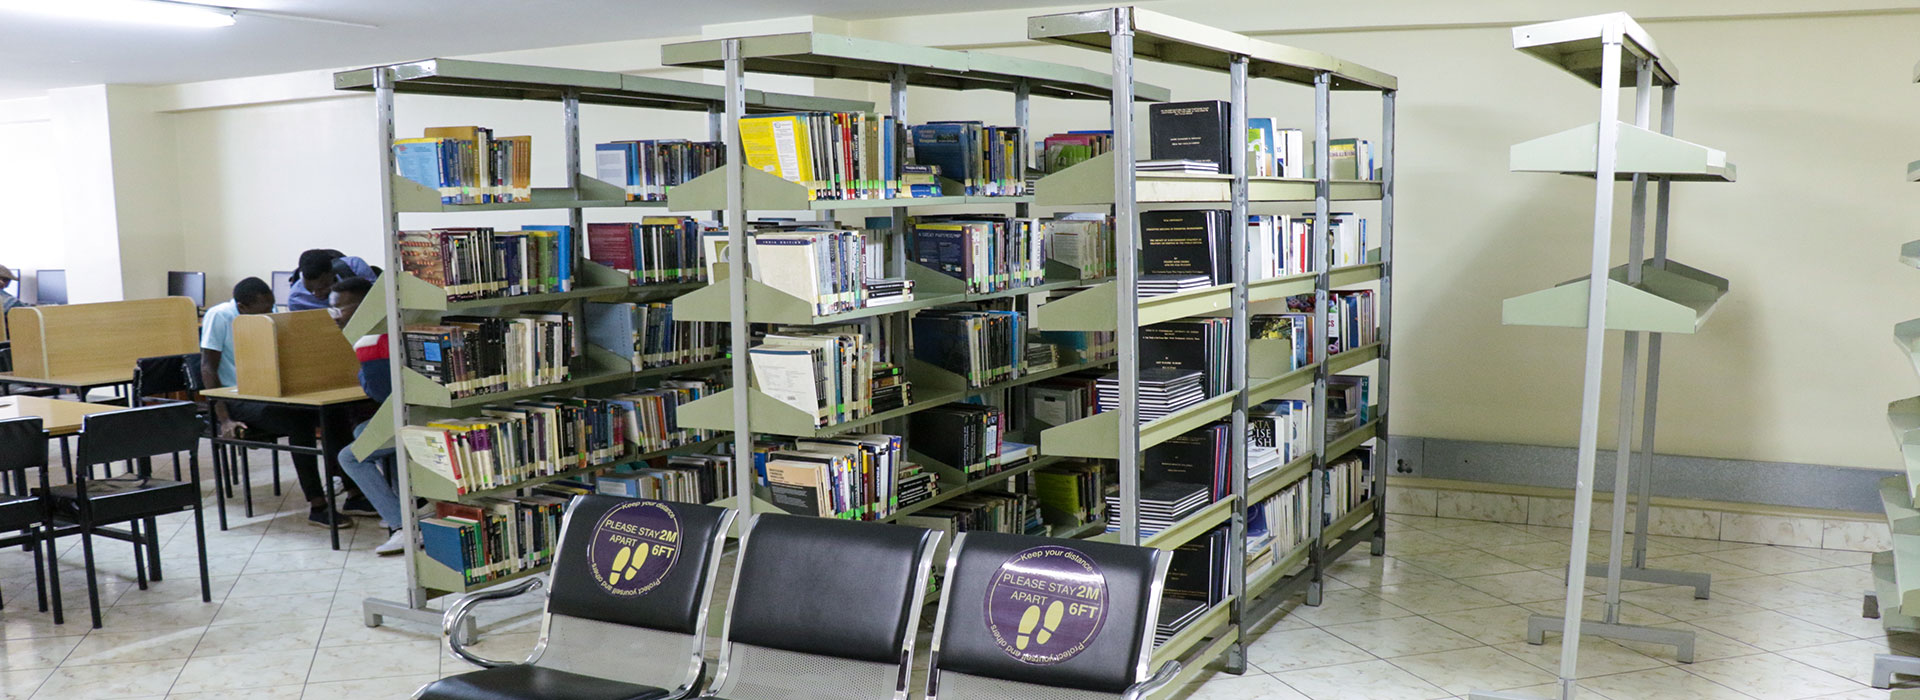 KCAU-Town-Campus-Library-books on shelves